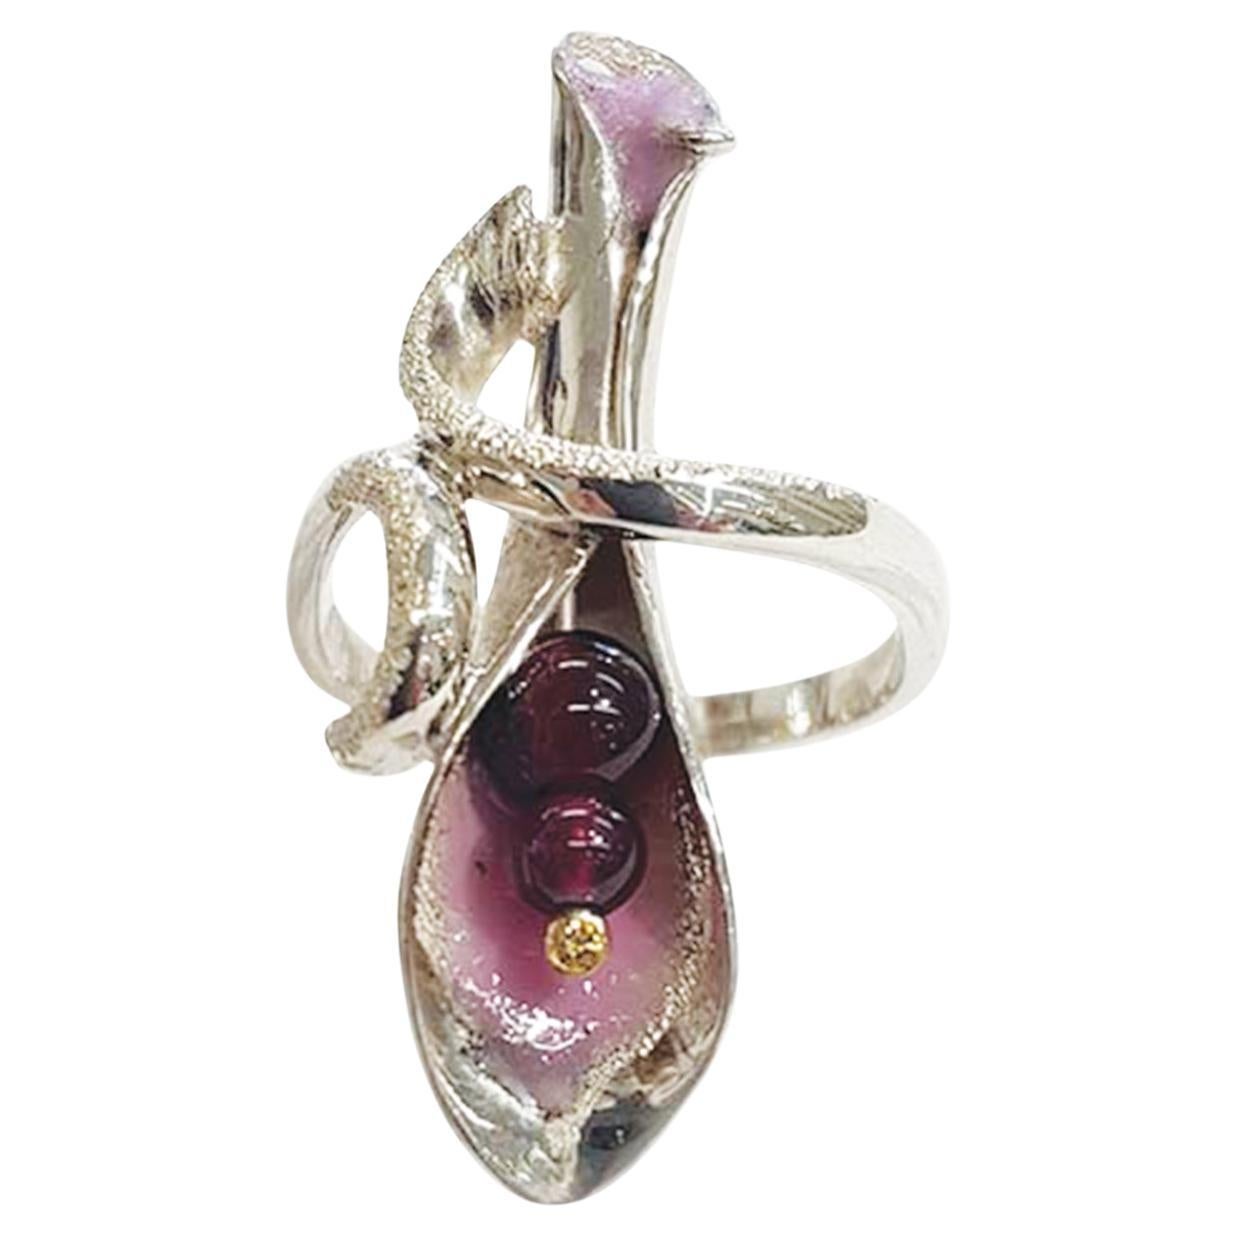 Paul Amey "Pink Lily" Ring